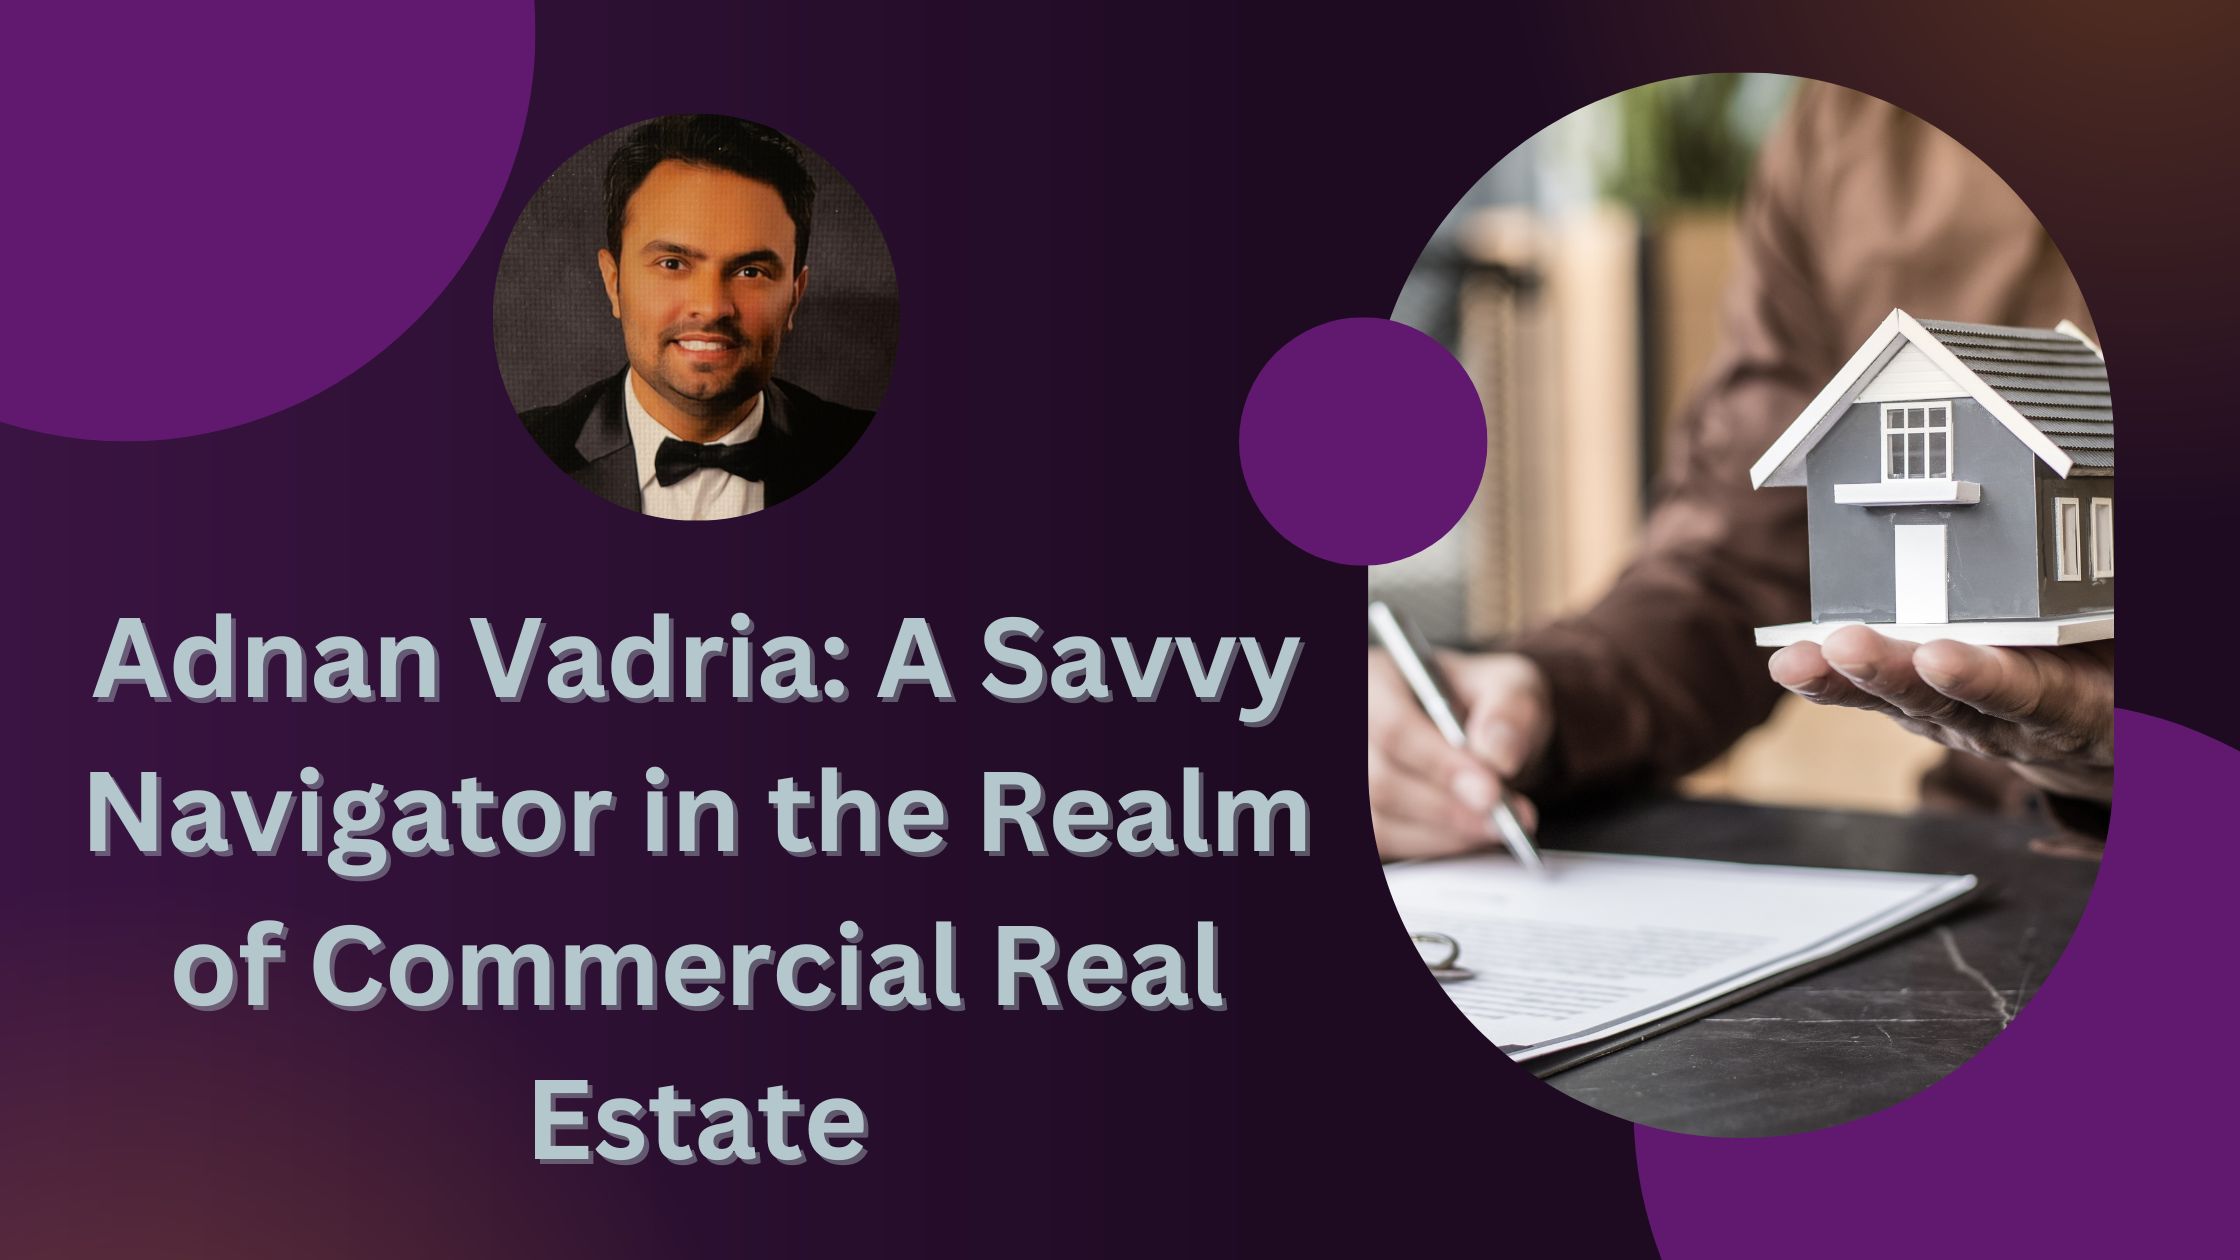 Adnan Vadria: A Savvy Navigator in the Realm of Commercial Real Estate